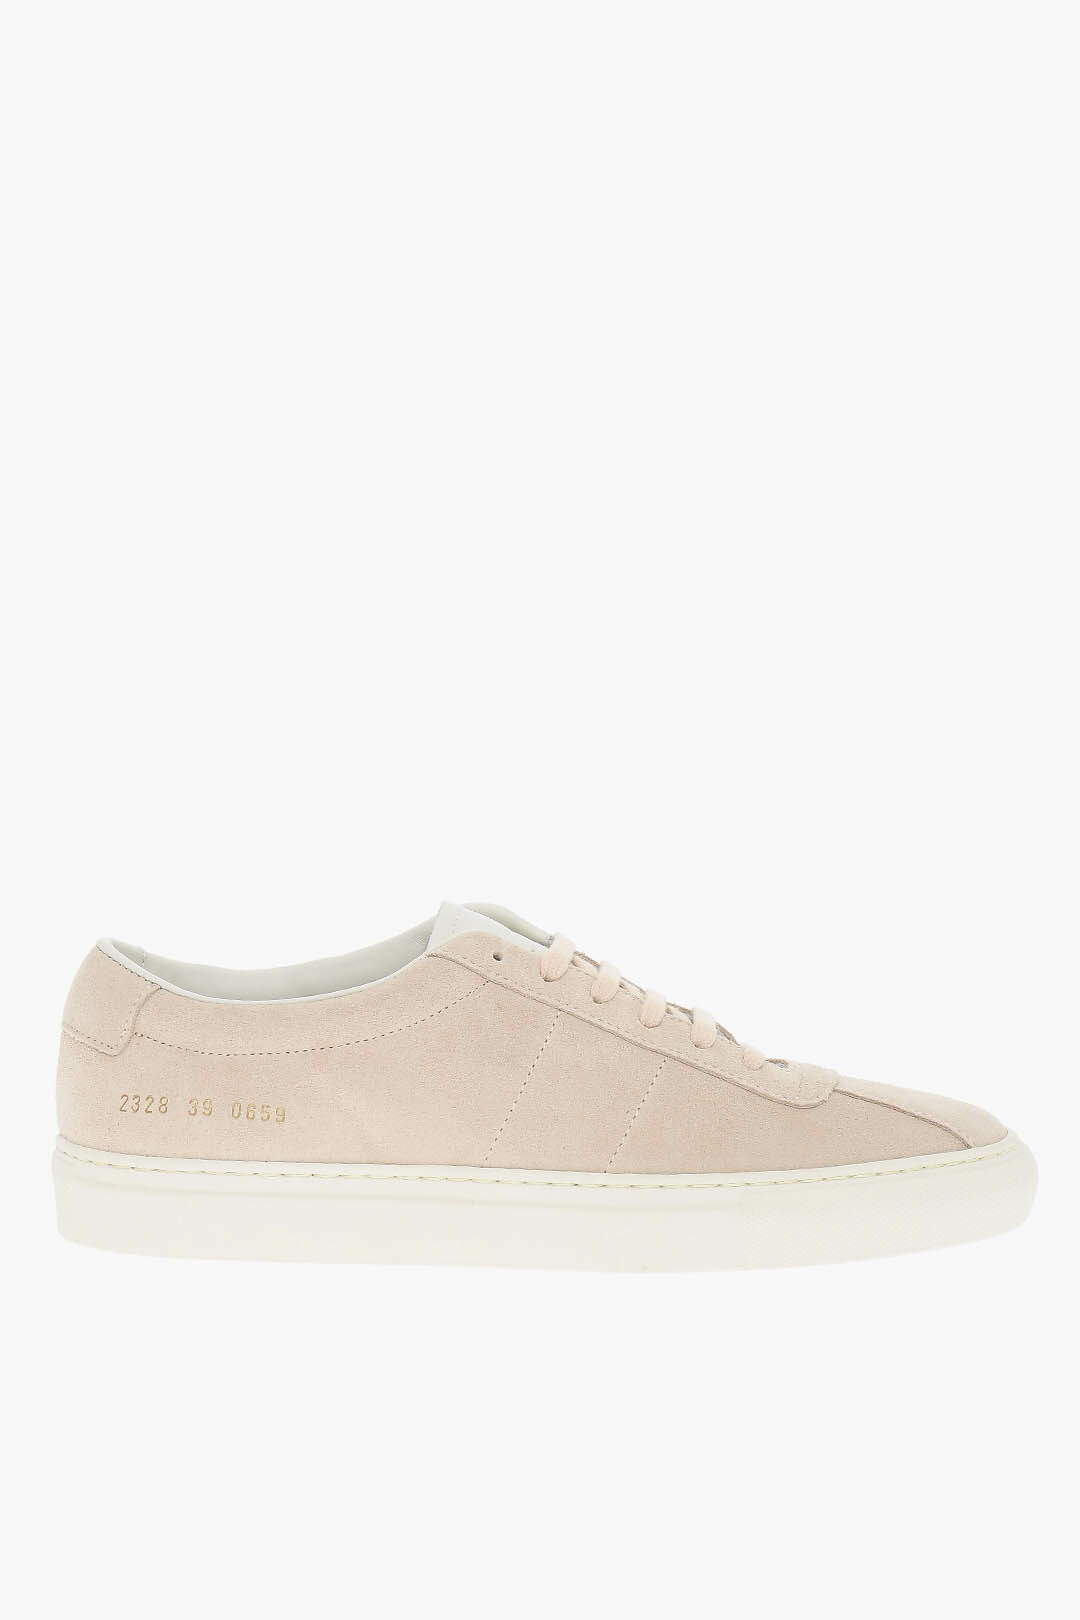 plisseret stave Hub Common projects Rubber Soles Suede Leather Low-Top Sneakers men - Glamood  Outlet